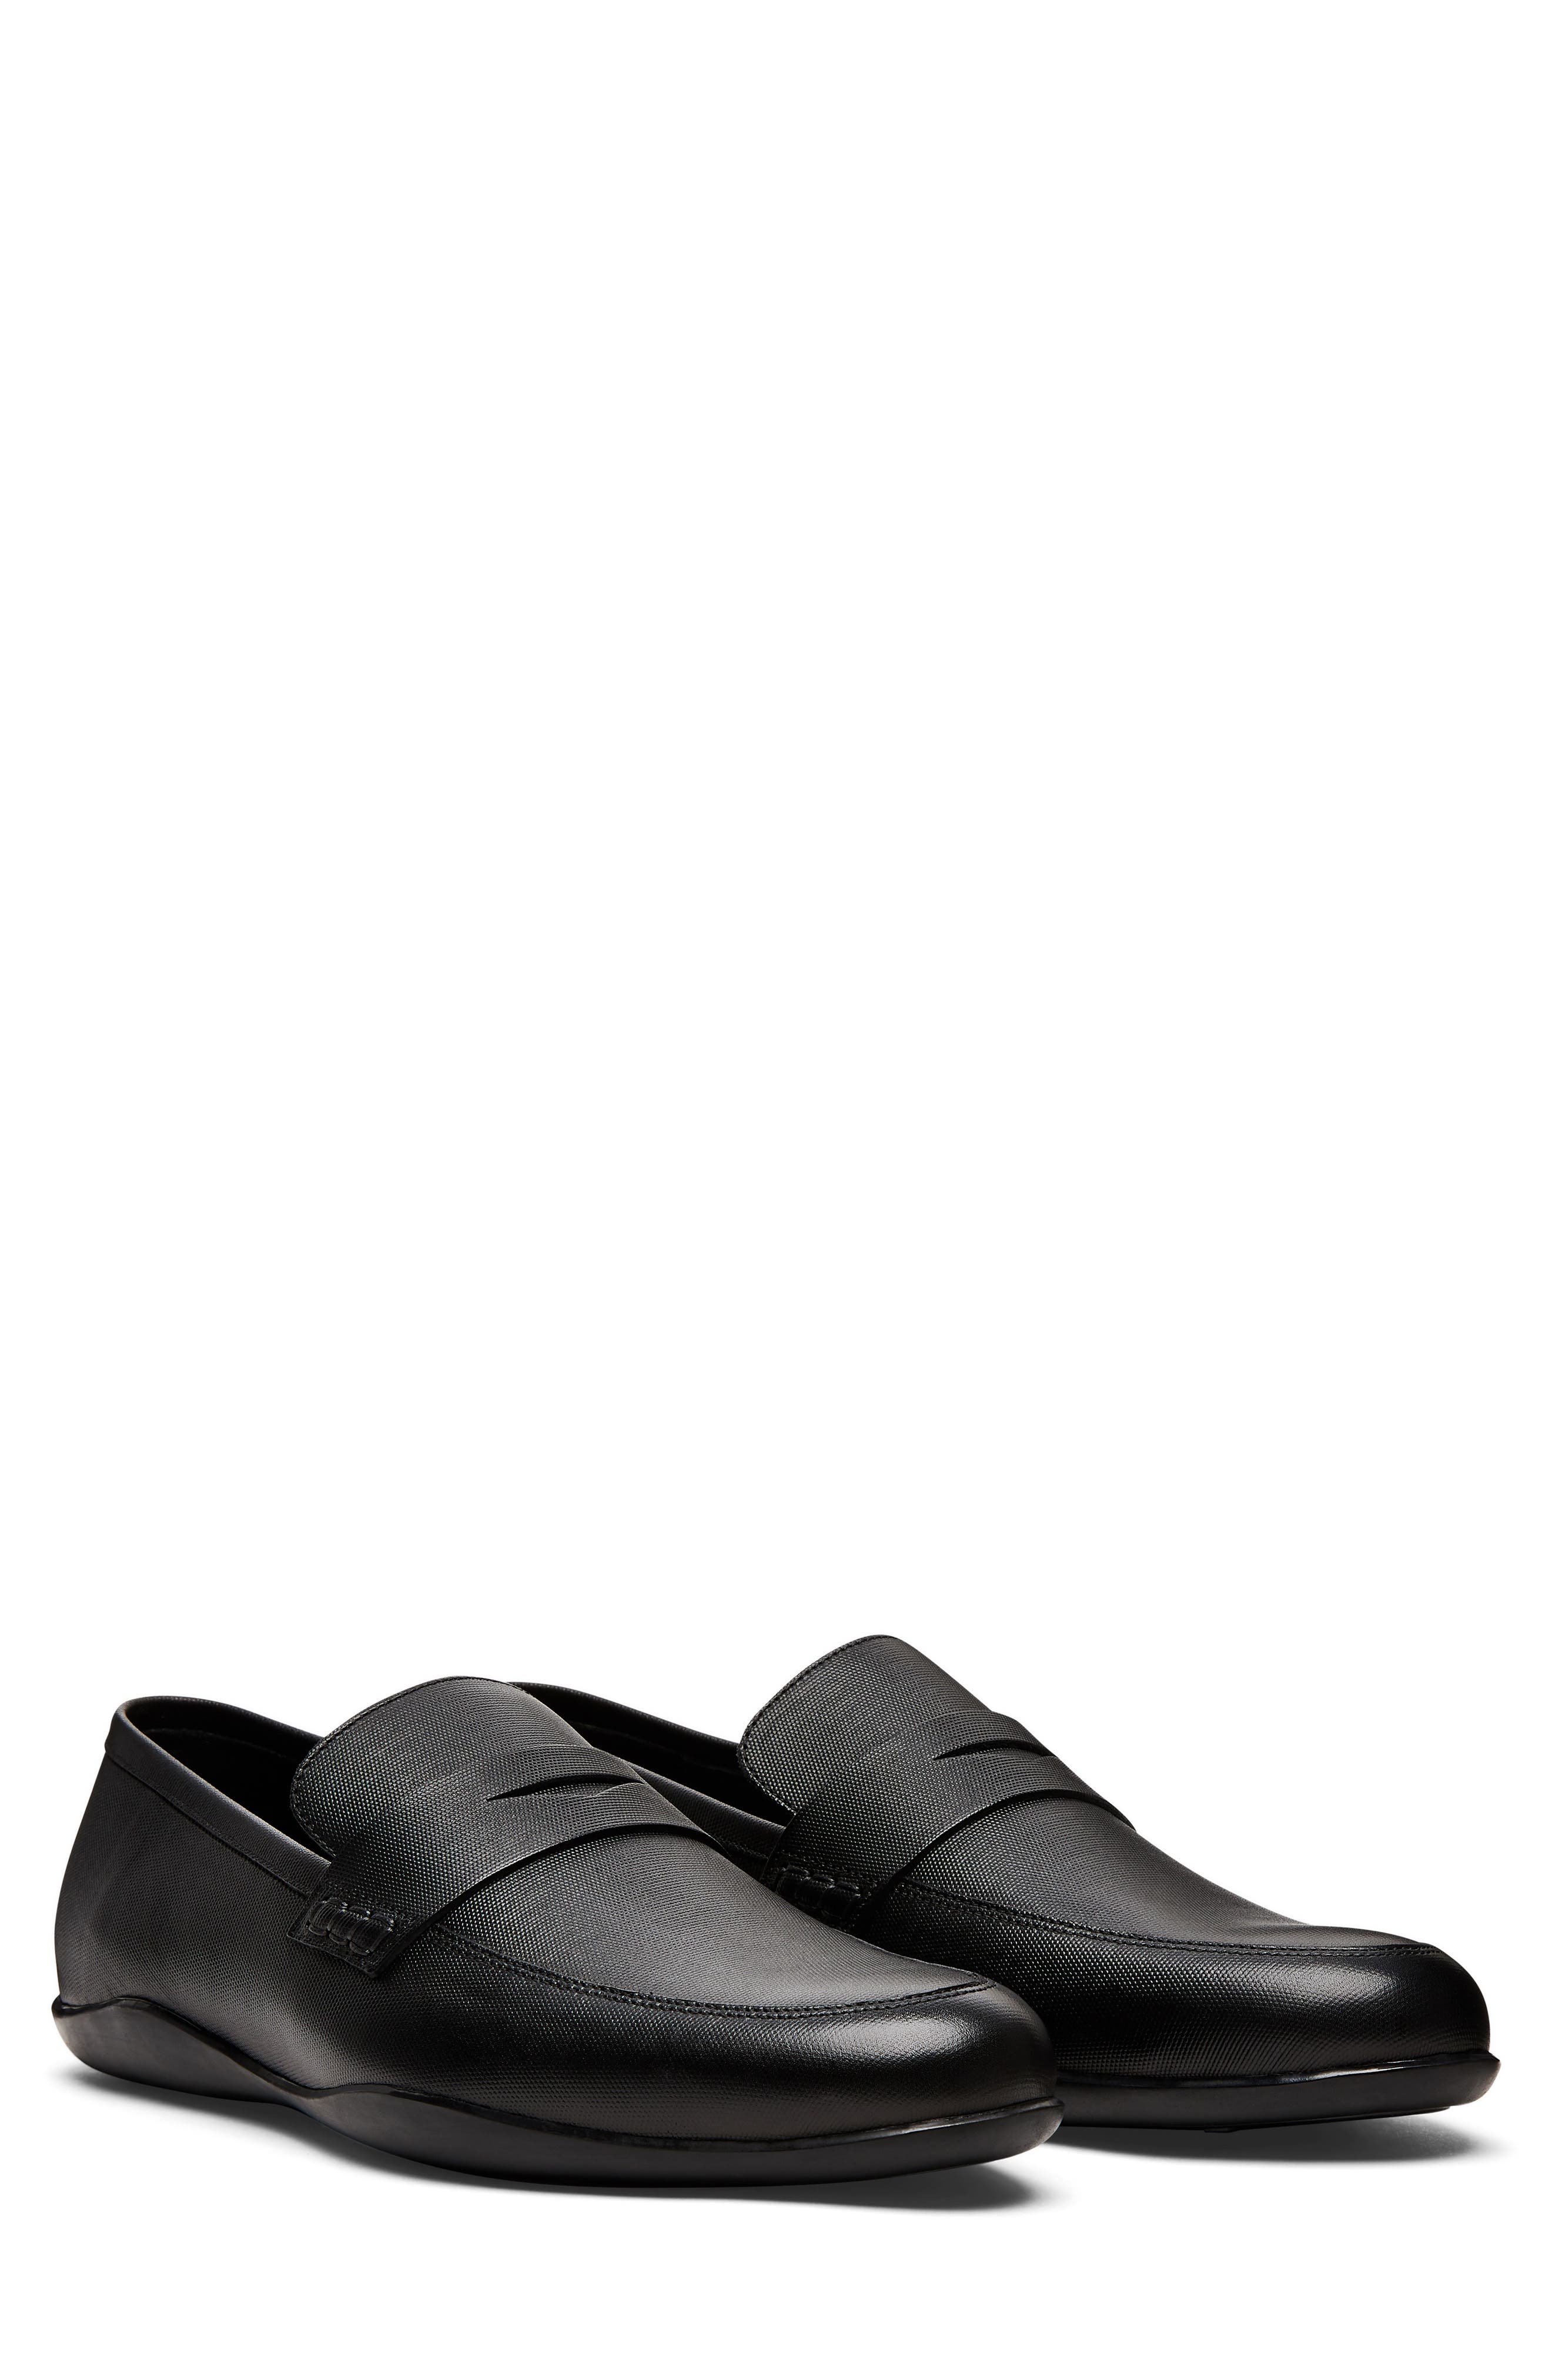 Harrys of London Downing Penny Loafer in Black at Nordstrom